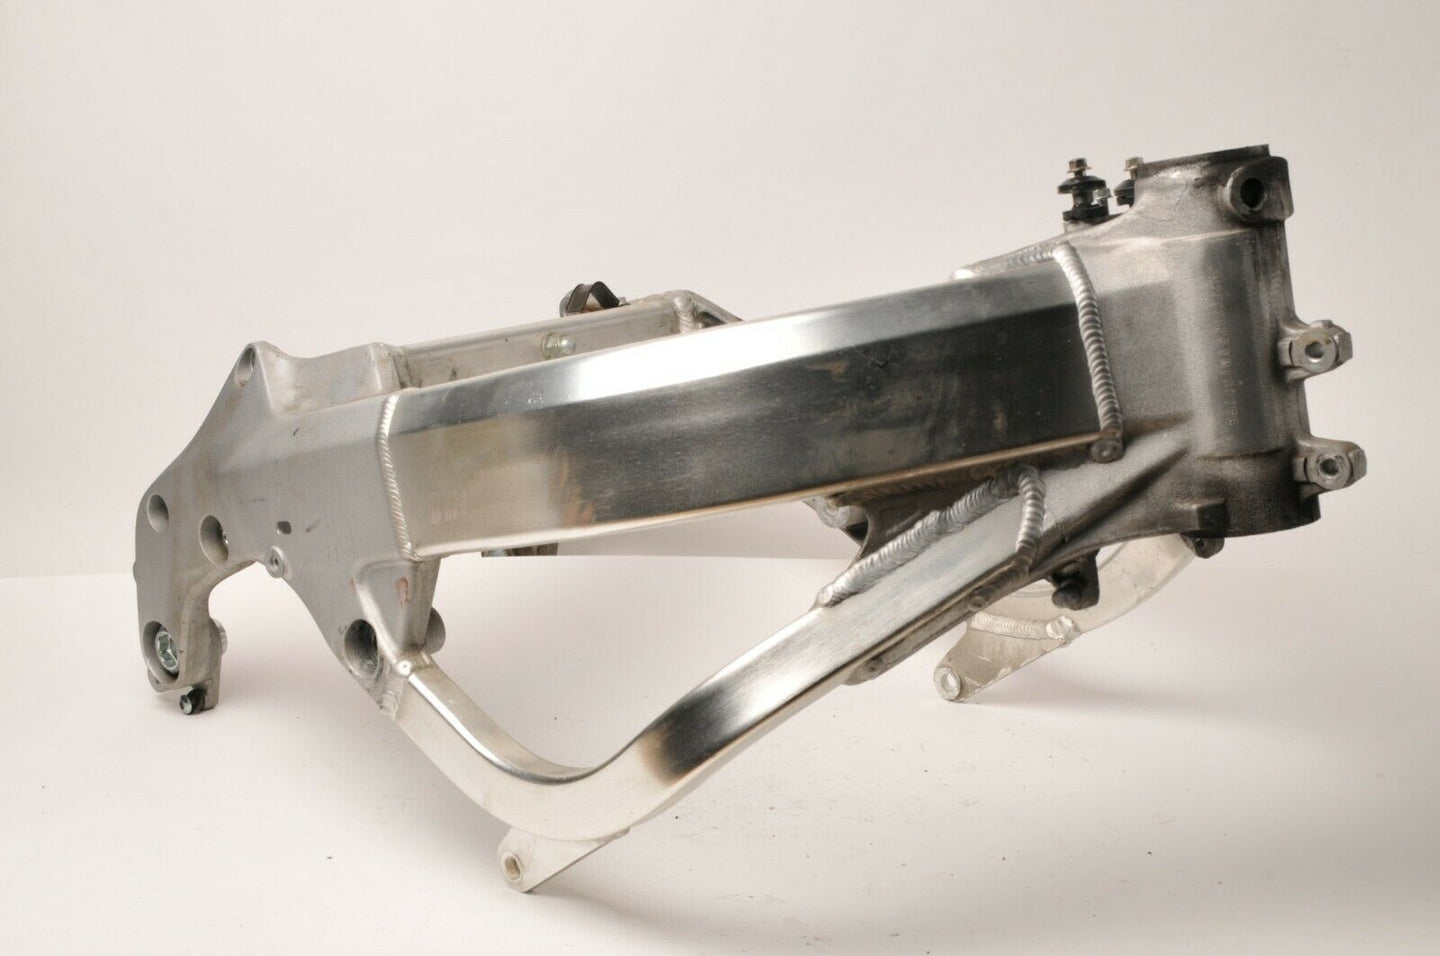 Genuine Honda 50100-MBW-000 Frame, Main with clean title ownership CBR600F4 2000